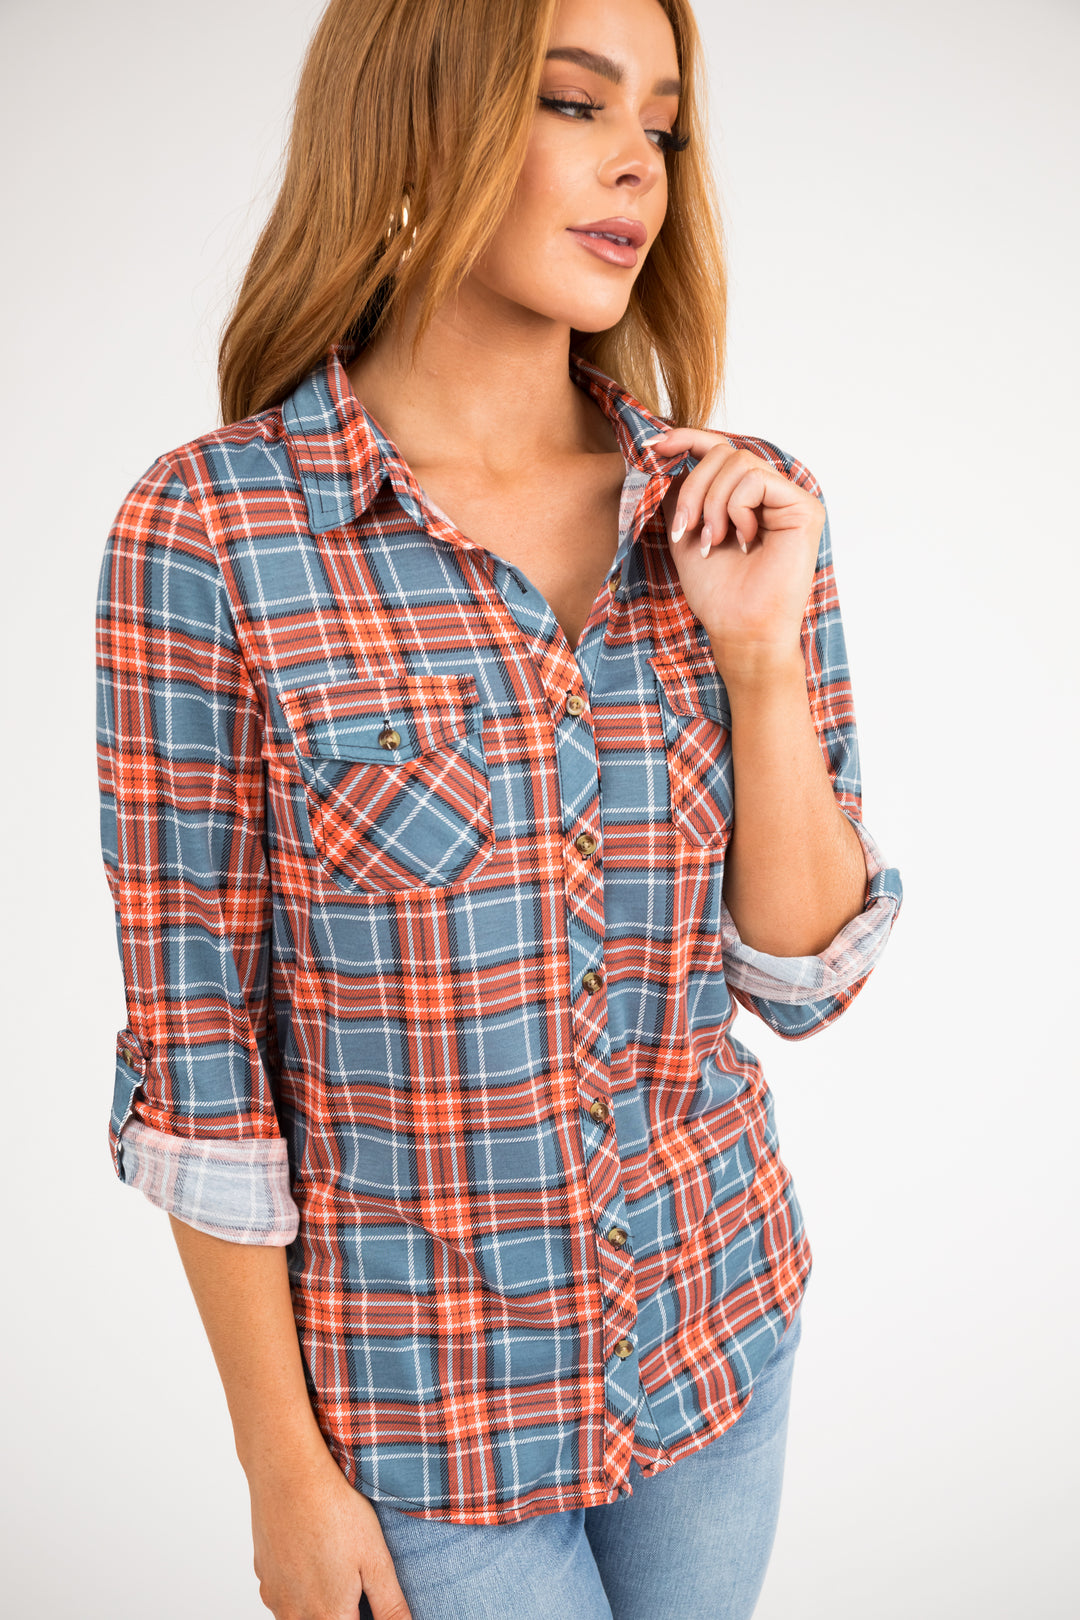 Slate and Pumpkin Plaid Top with Chest Pocket & Lime Lush